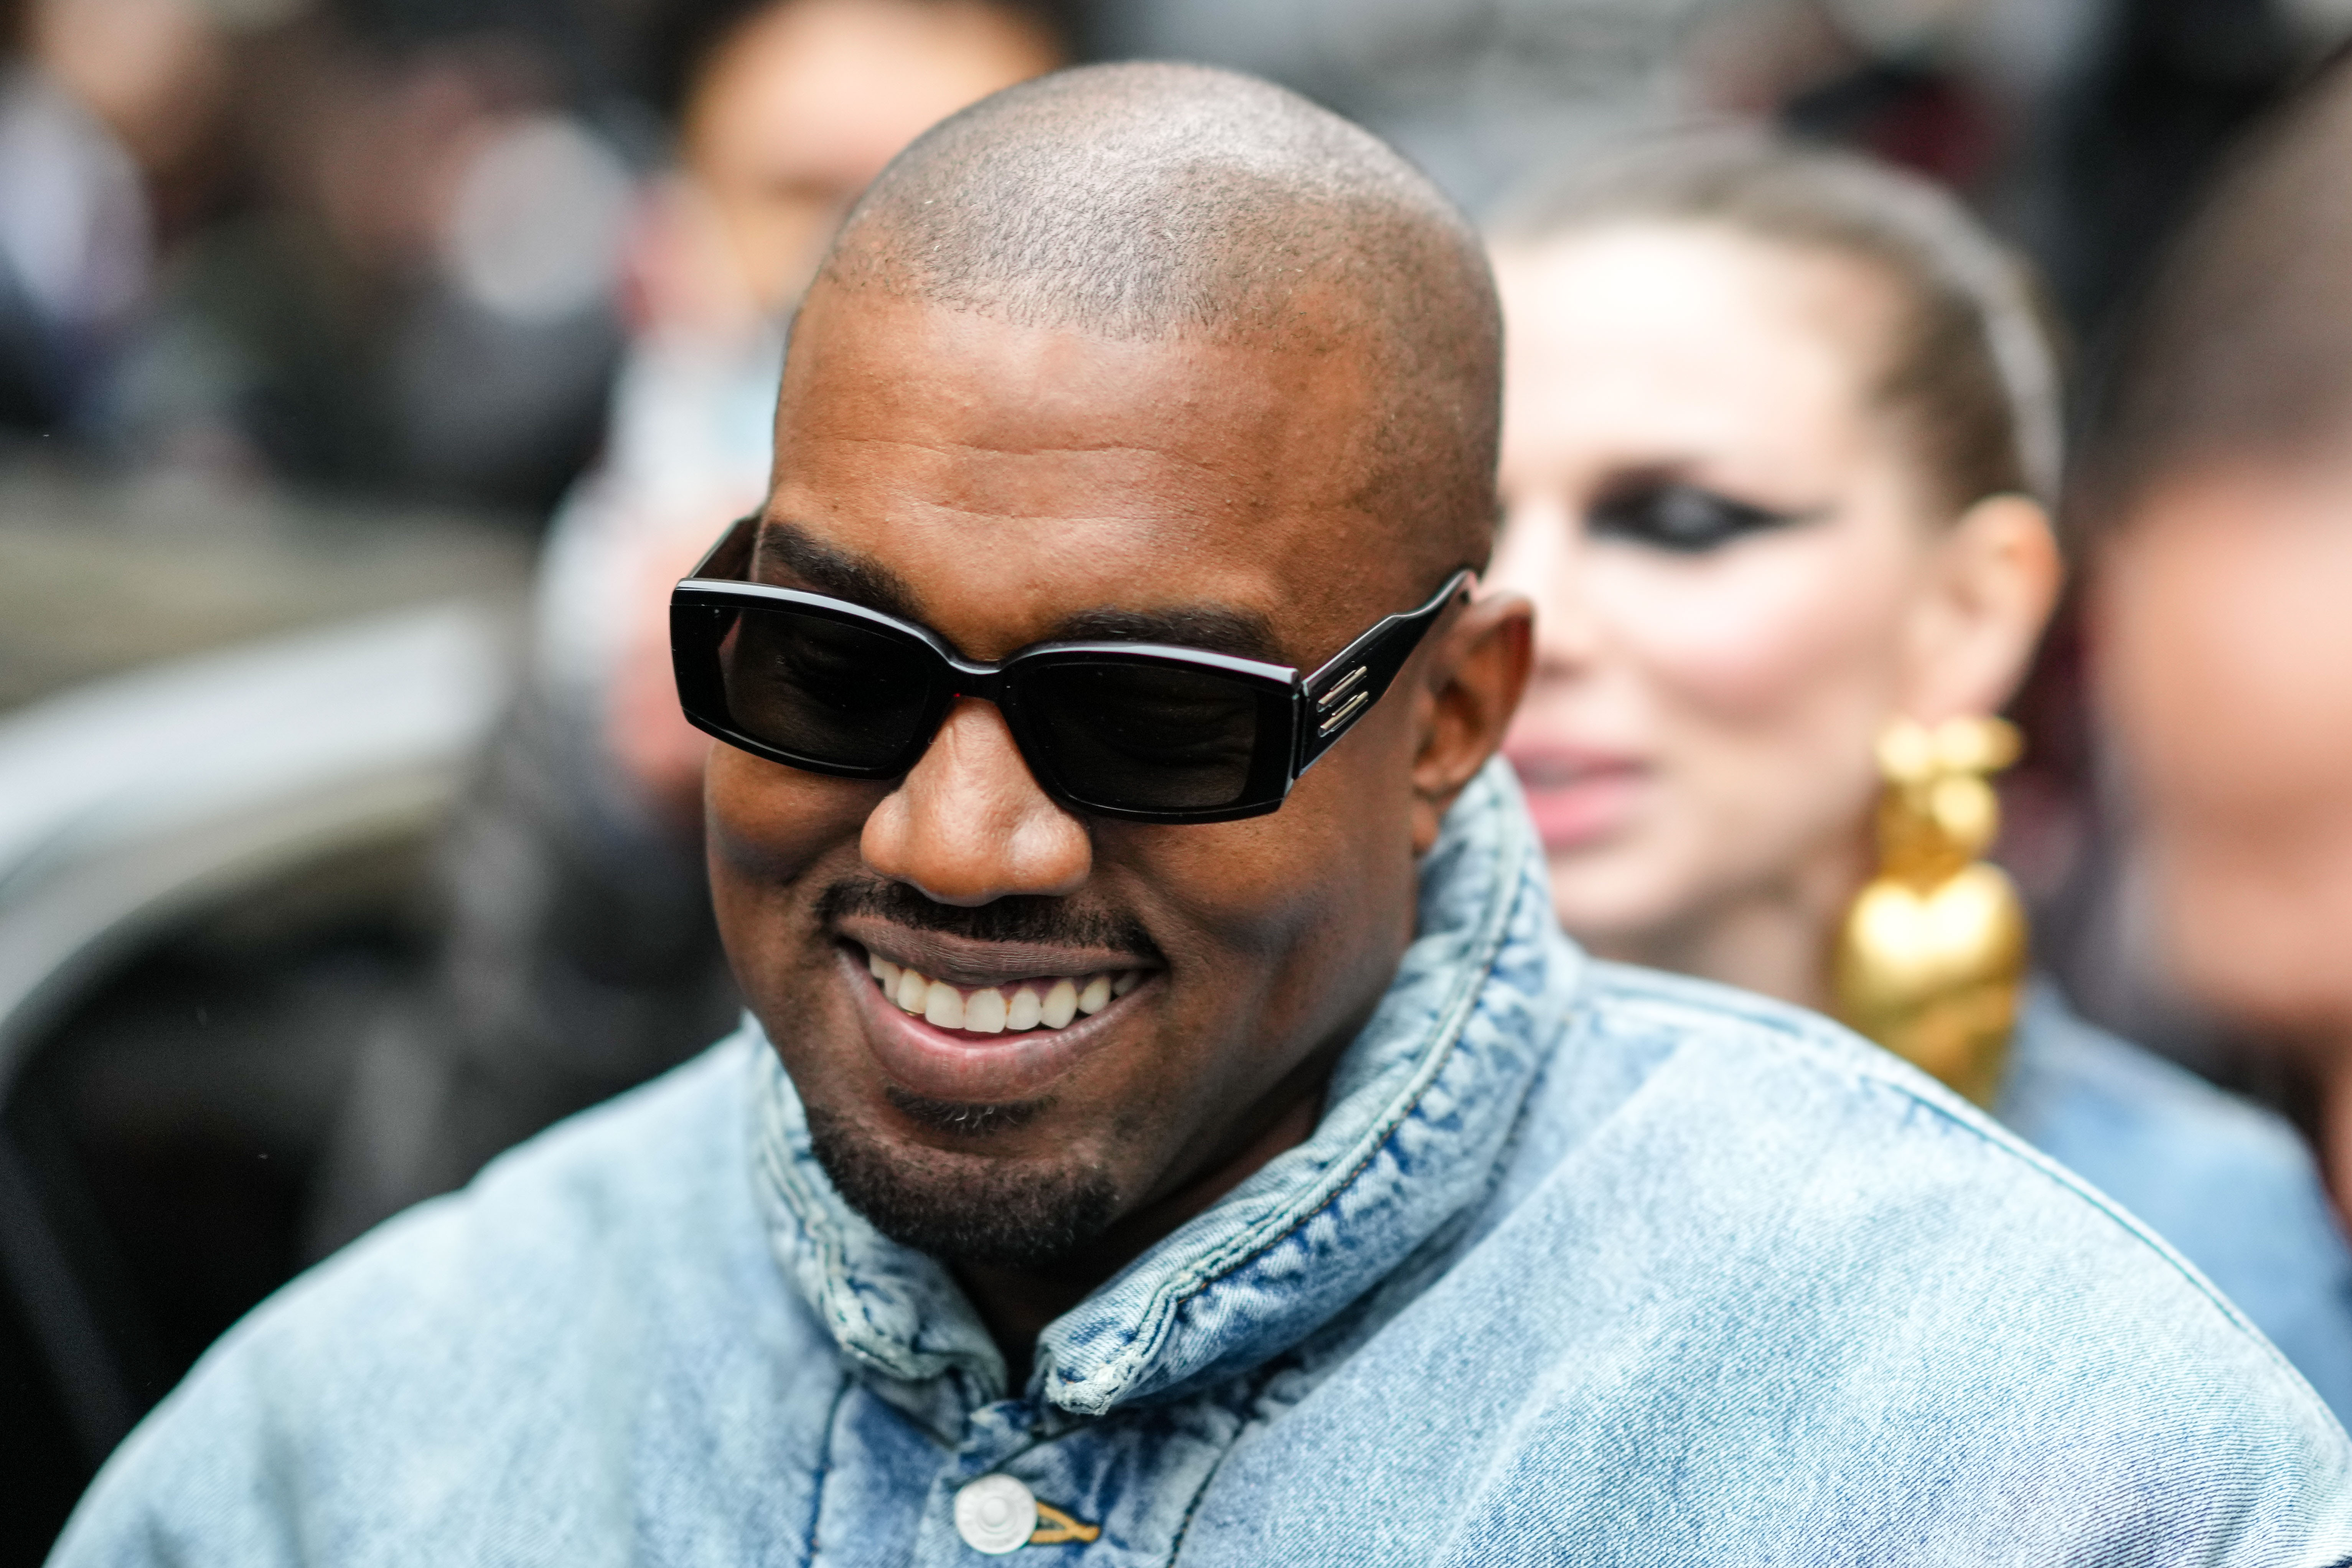 Adidas Has Cut Ties With Kanye Over Remarks